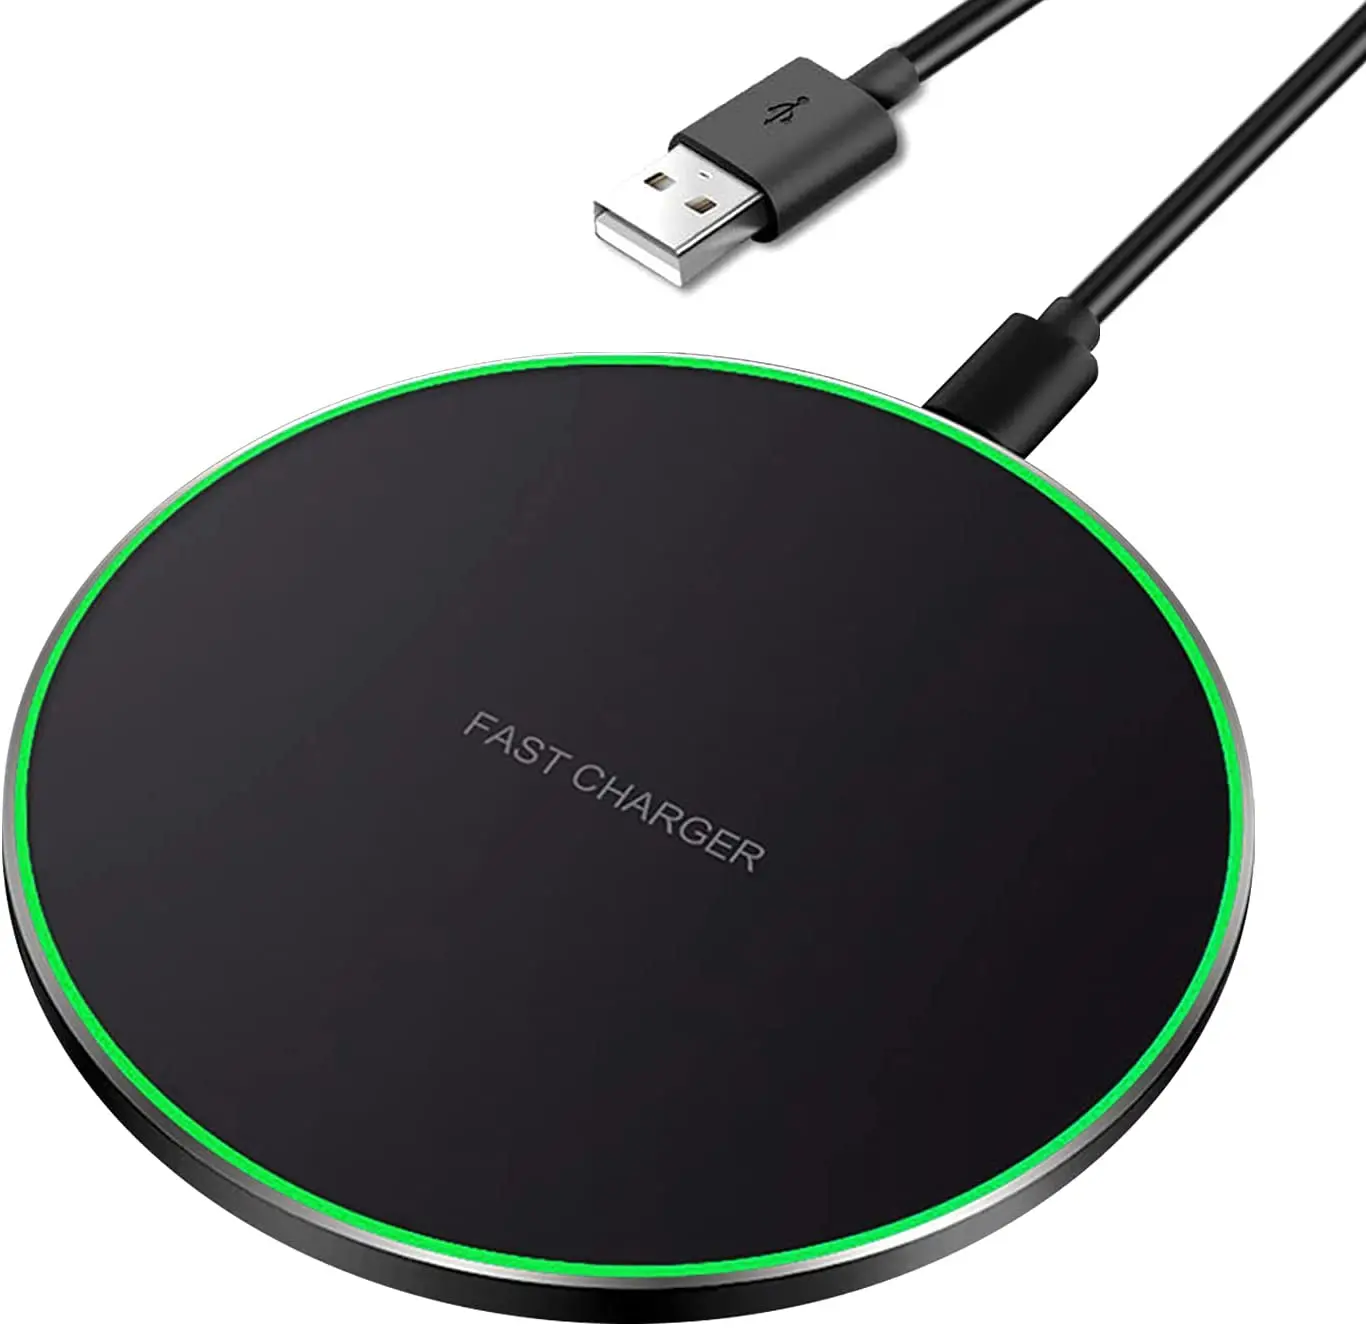 

2019 New Arrived Qi Certified 2000mA 5V 10W Quick Charging Fast Charge Wireless Phone Charger Stand For Android For iPhone, Black